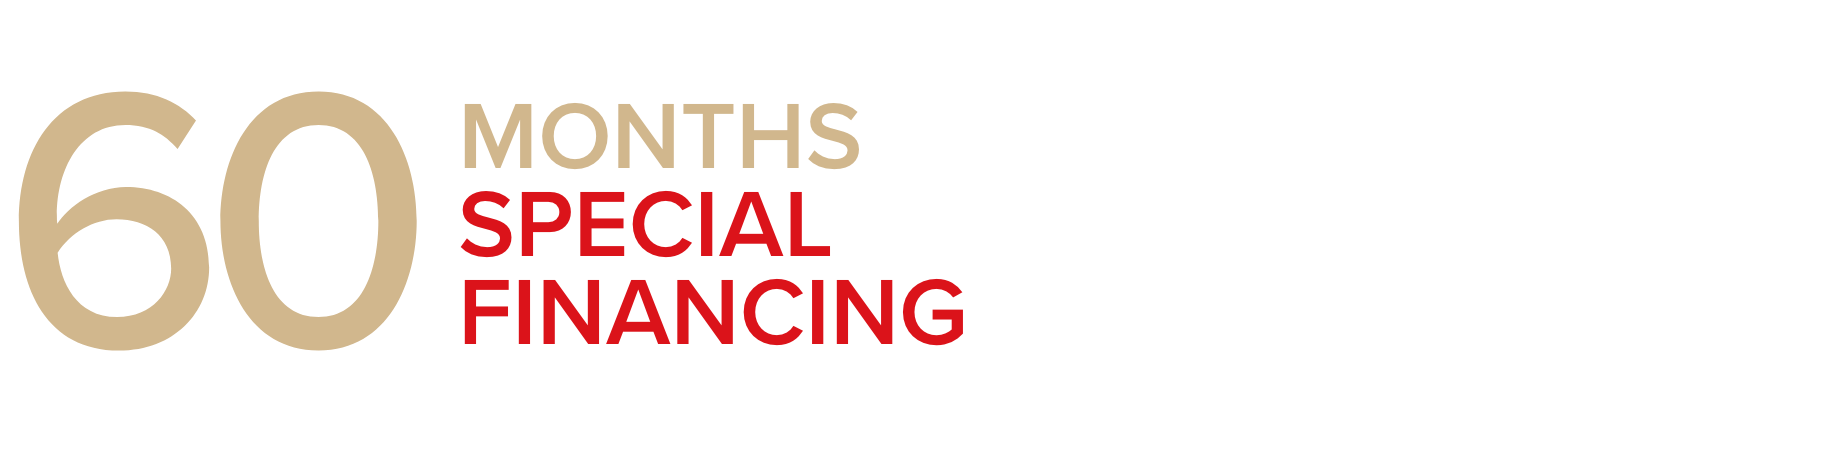 60 Months Special Financing